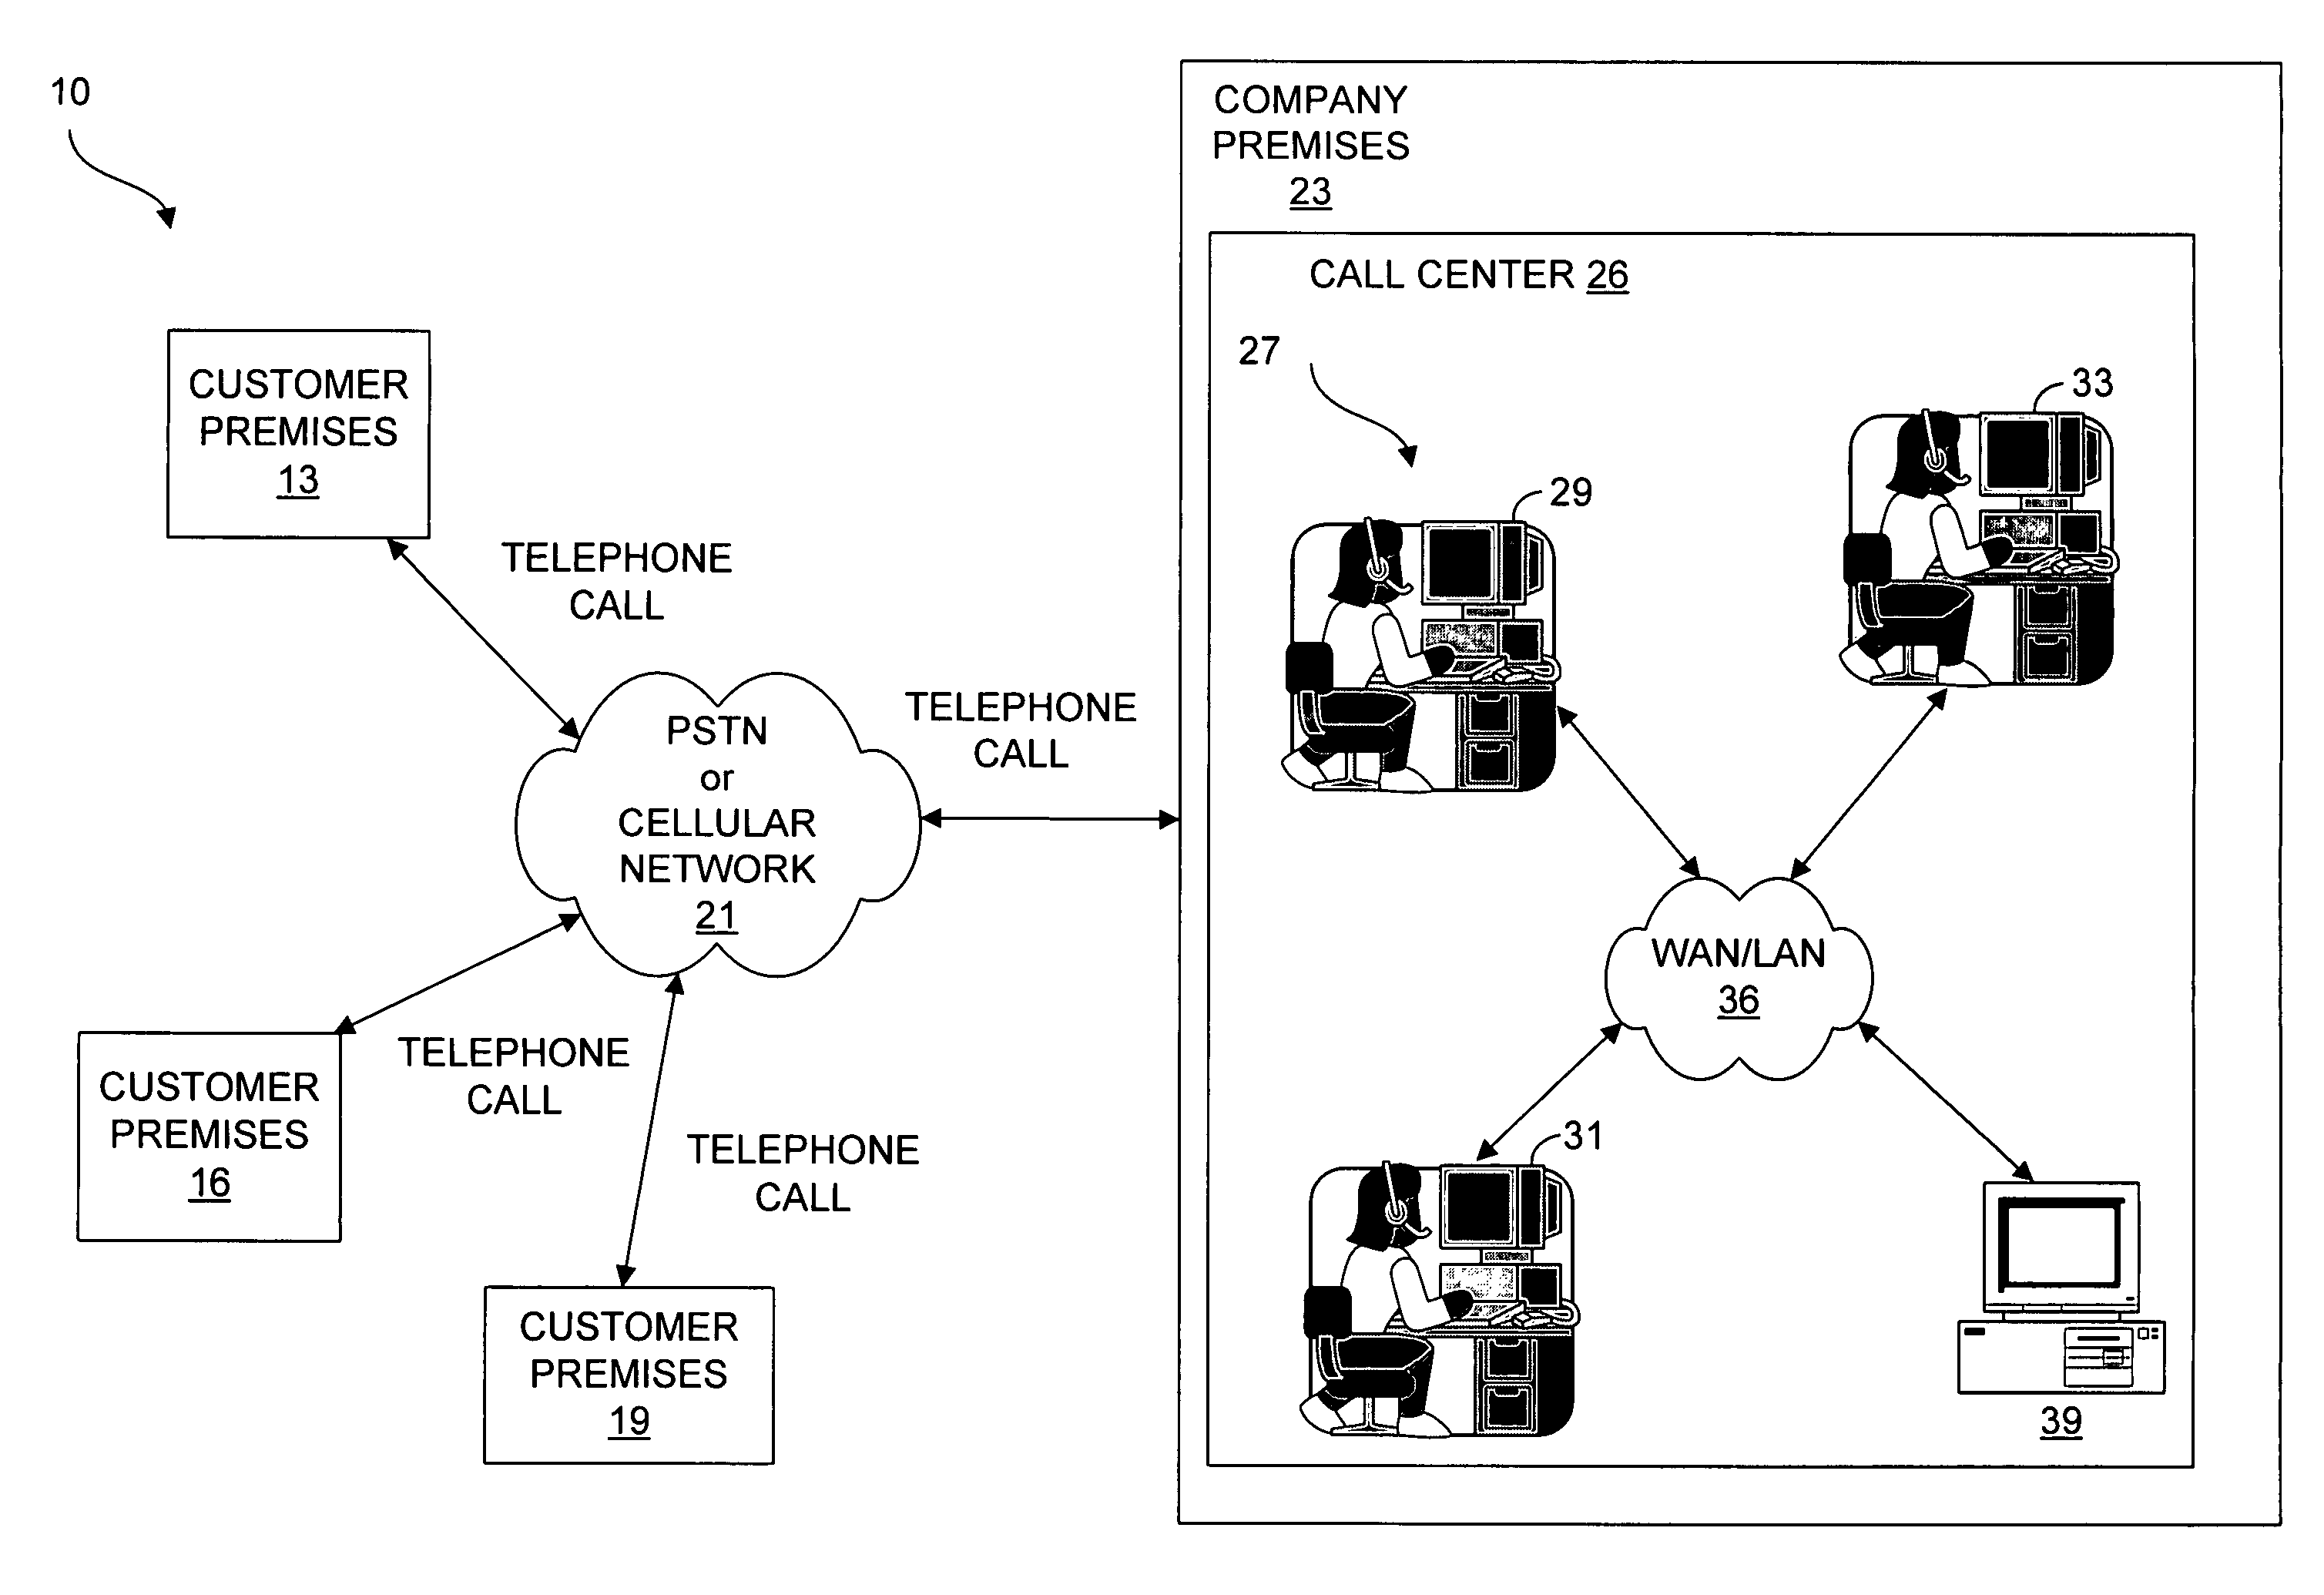 Systems and methods for scheduling call center agents using quality data and correlation-based discovery